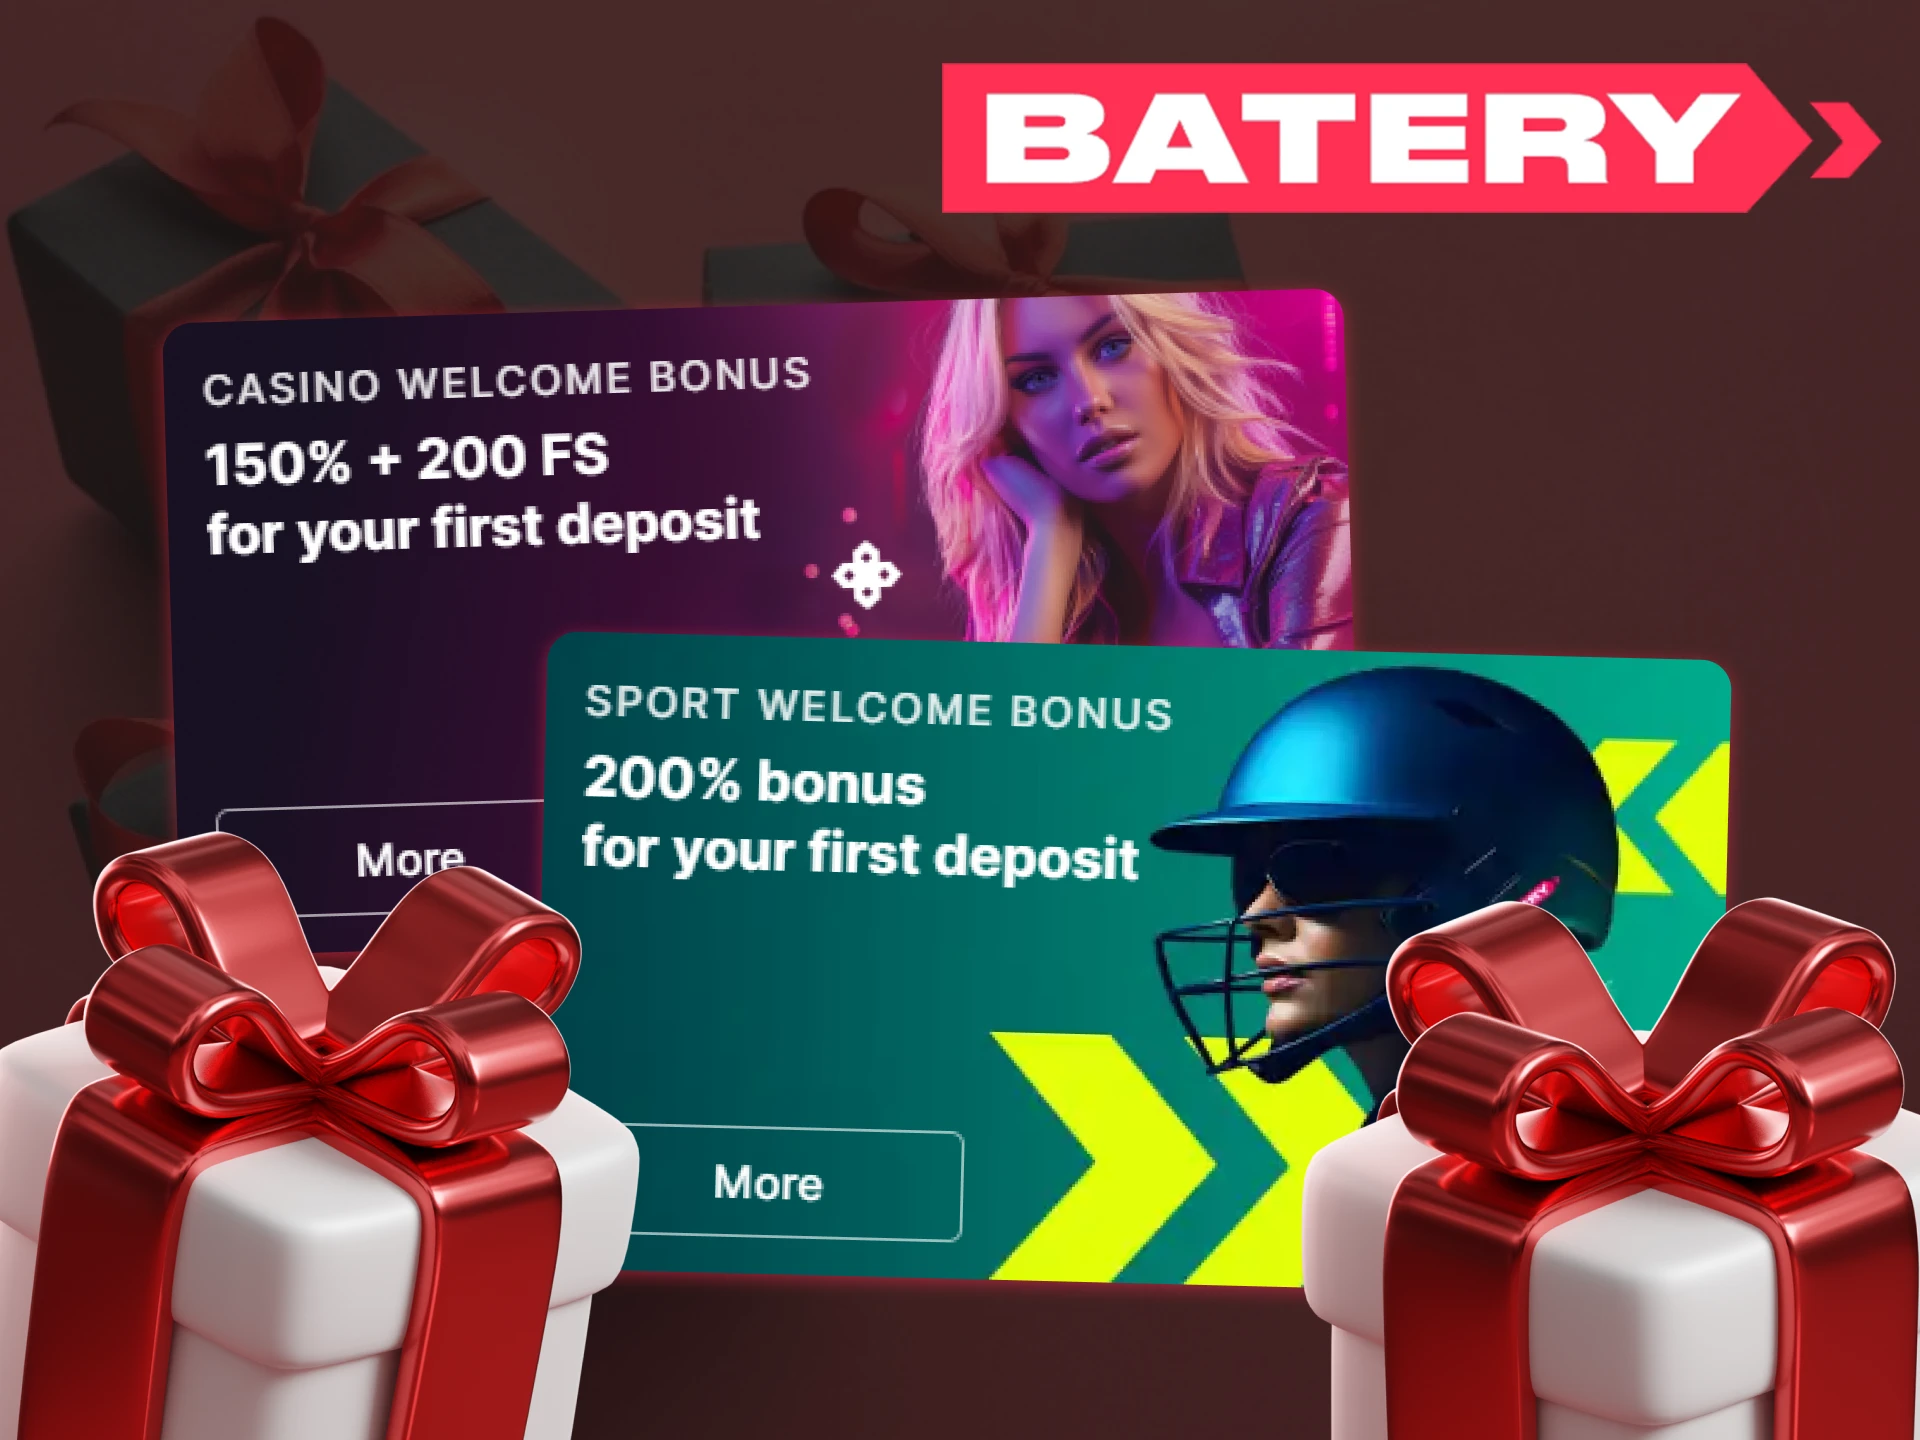 At Batery you can receive a sports or casino welcome bonus upon registration.